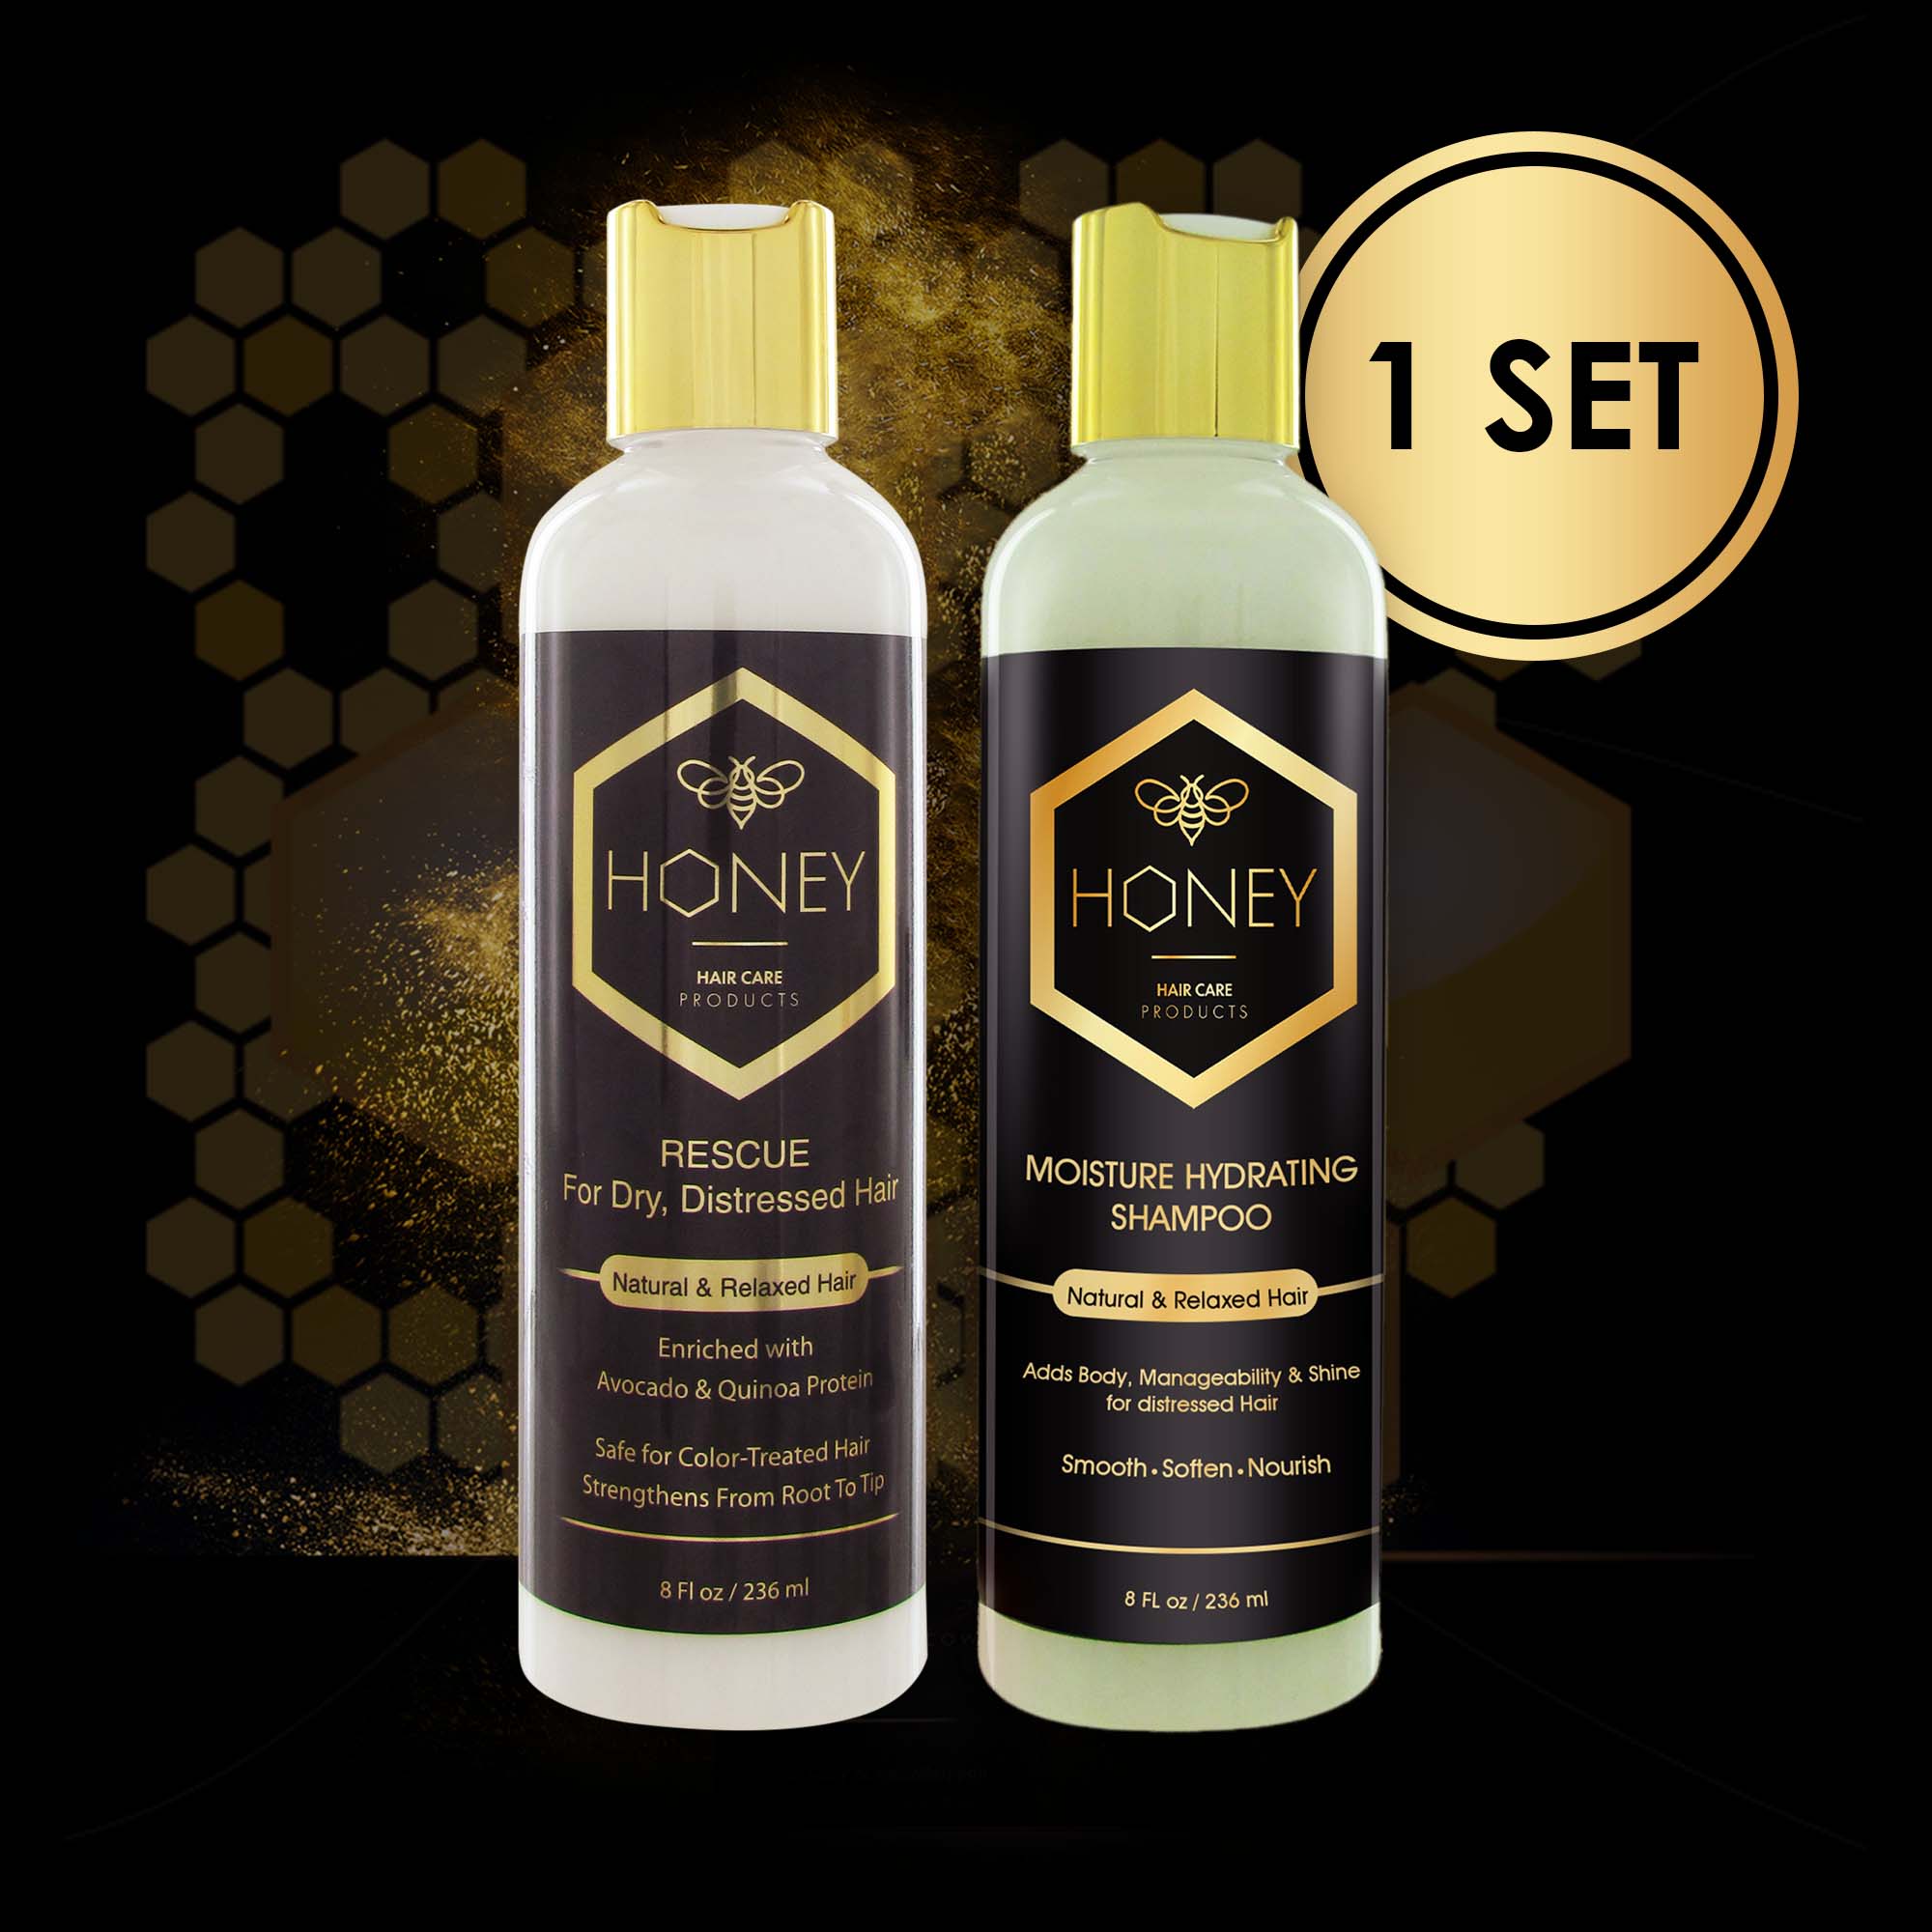 (1 SET) Moisture Hydrating Shampoo and Rescue Conditioner by Honey Haircare 8fl oz